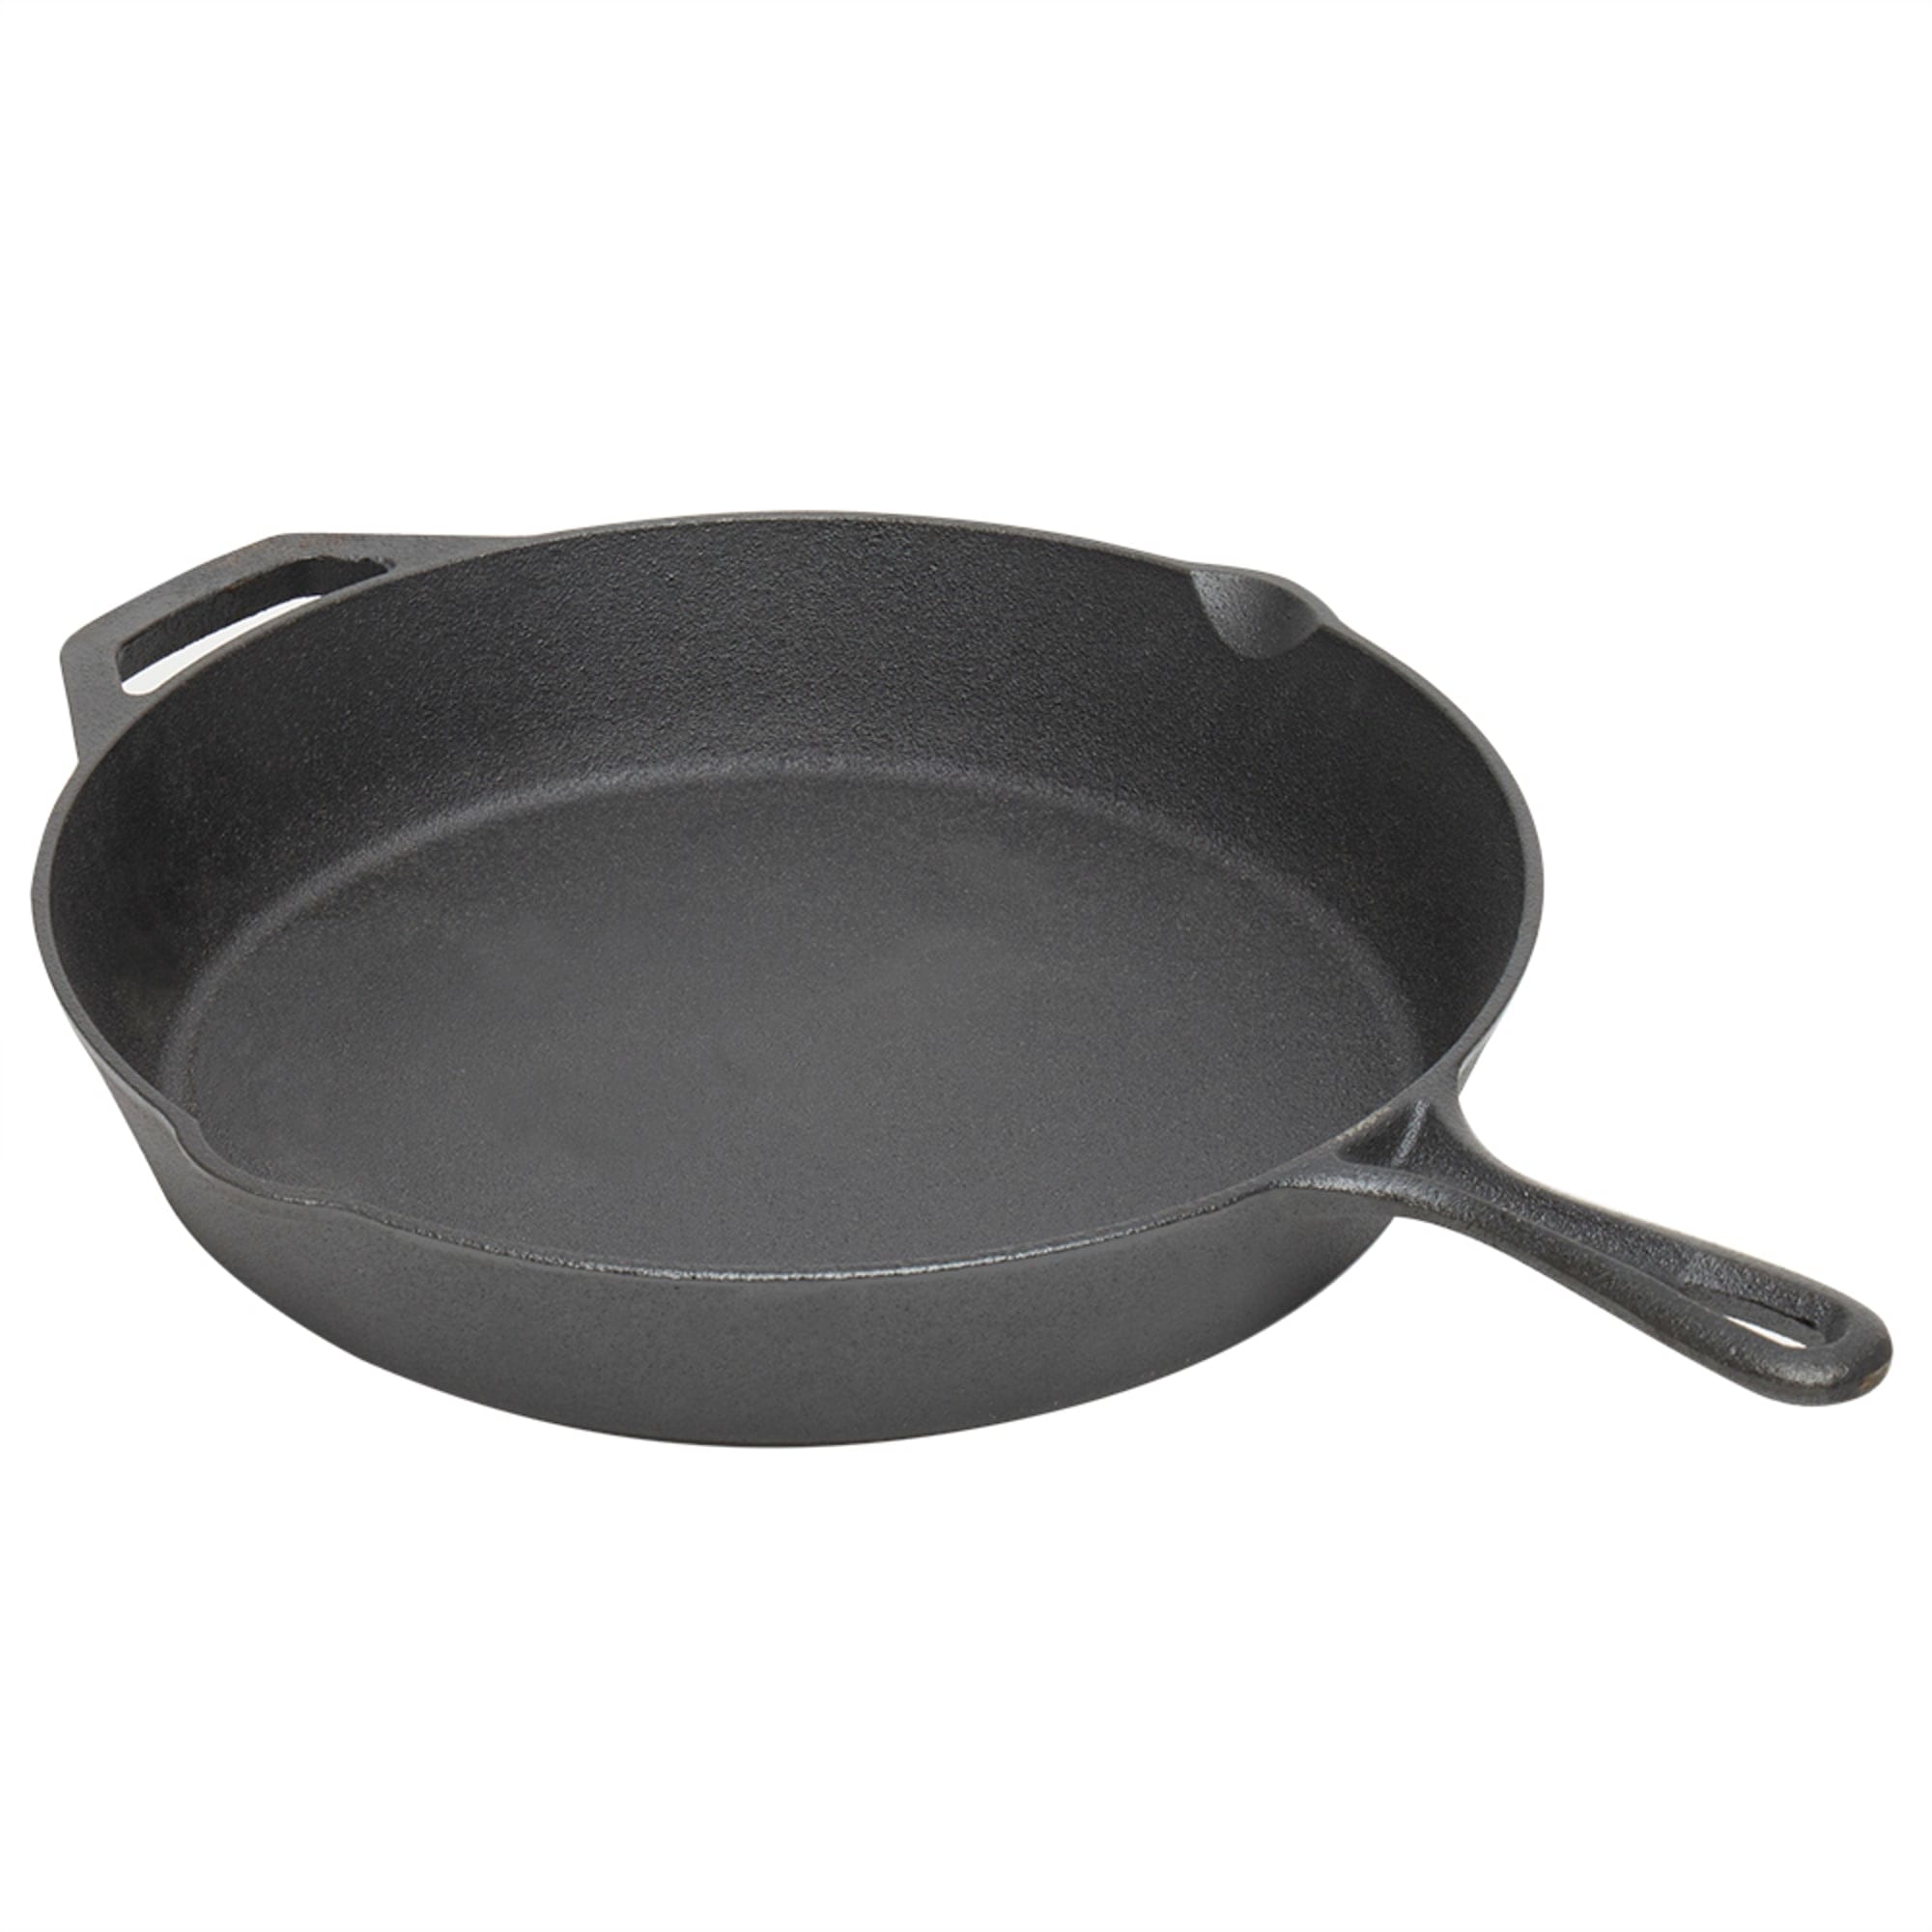 Home Basics Pre-Seasoned Cast Iron Skillet with Pour Spouts, (Set of 3) $40.00 EACH, CASE PACK OF 1